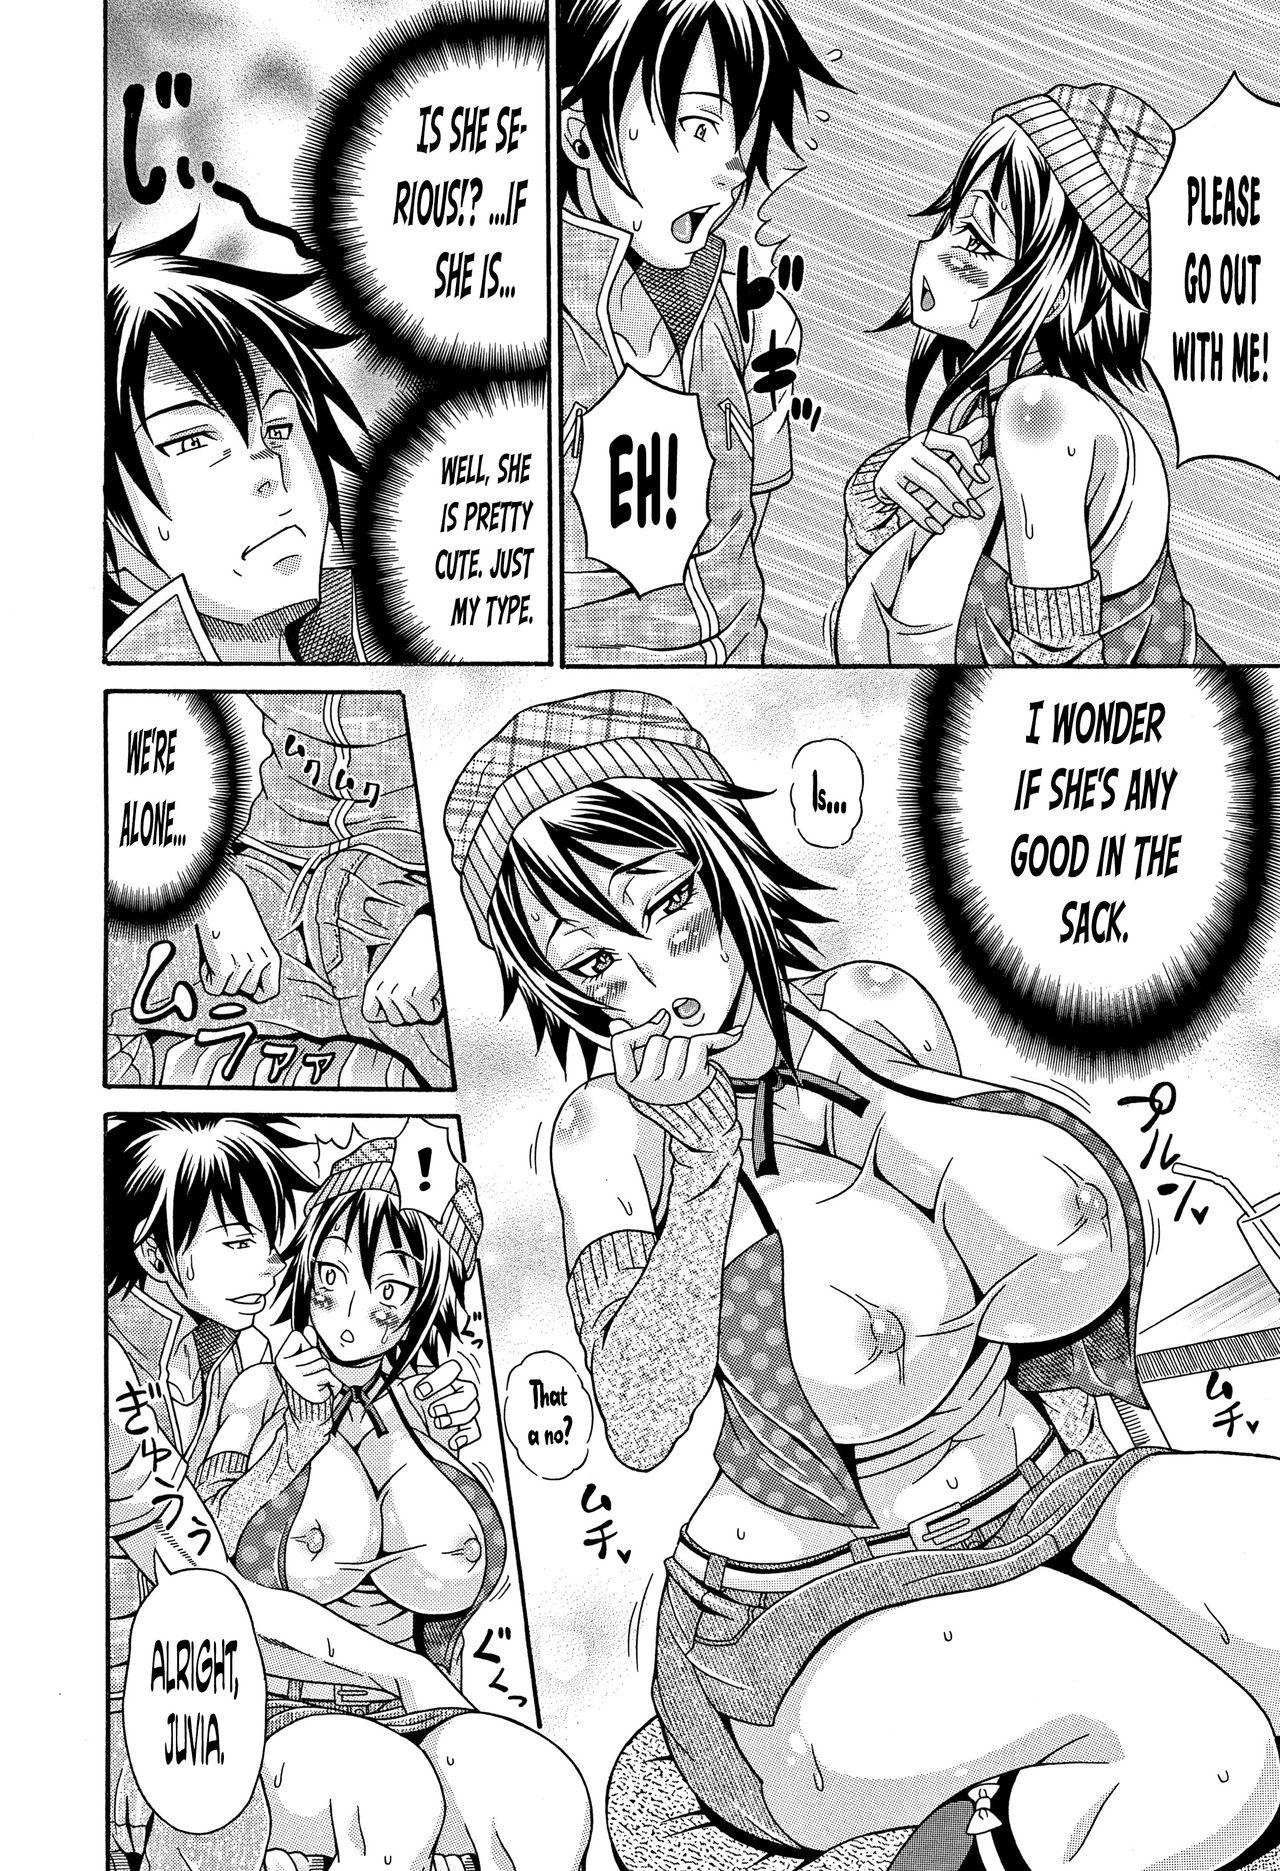 [Andou Hiroyuki] Mamire Chichi - Sticky Tits Feel Hot All Over. Ch.1-4 [English] [doujin-moe.us] 58